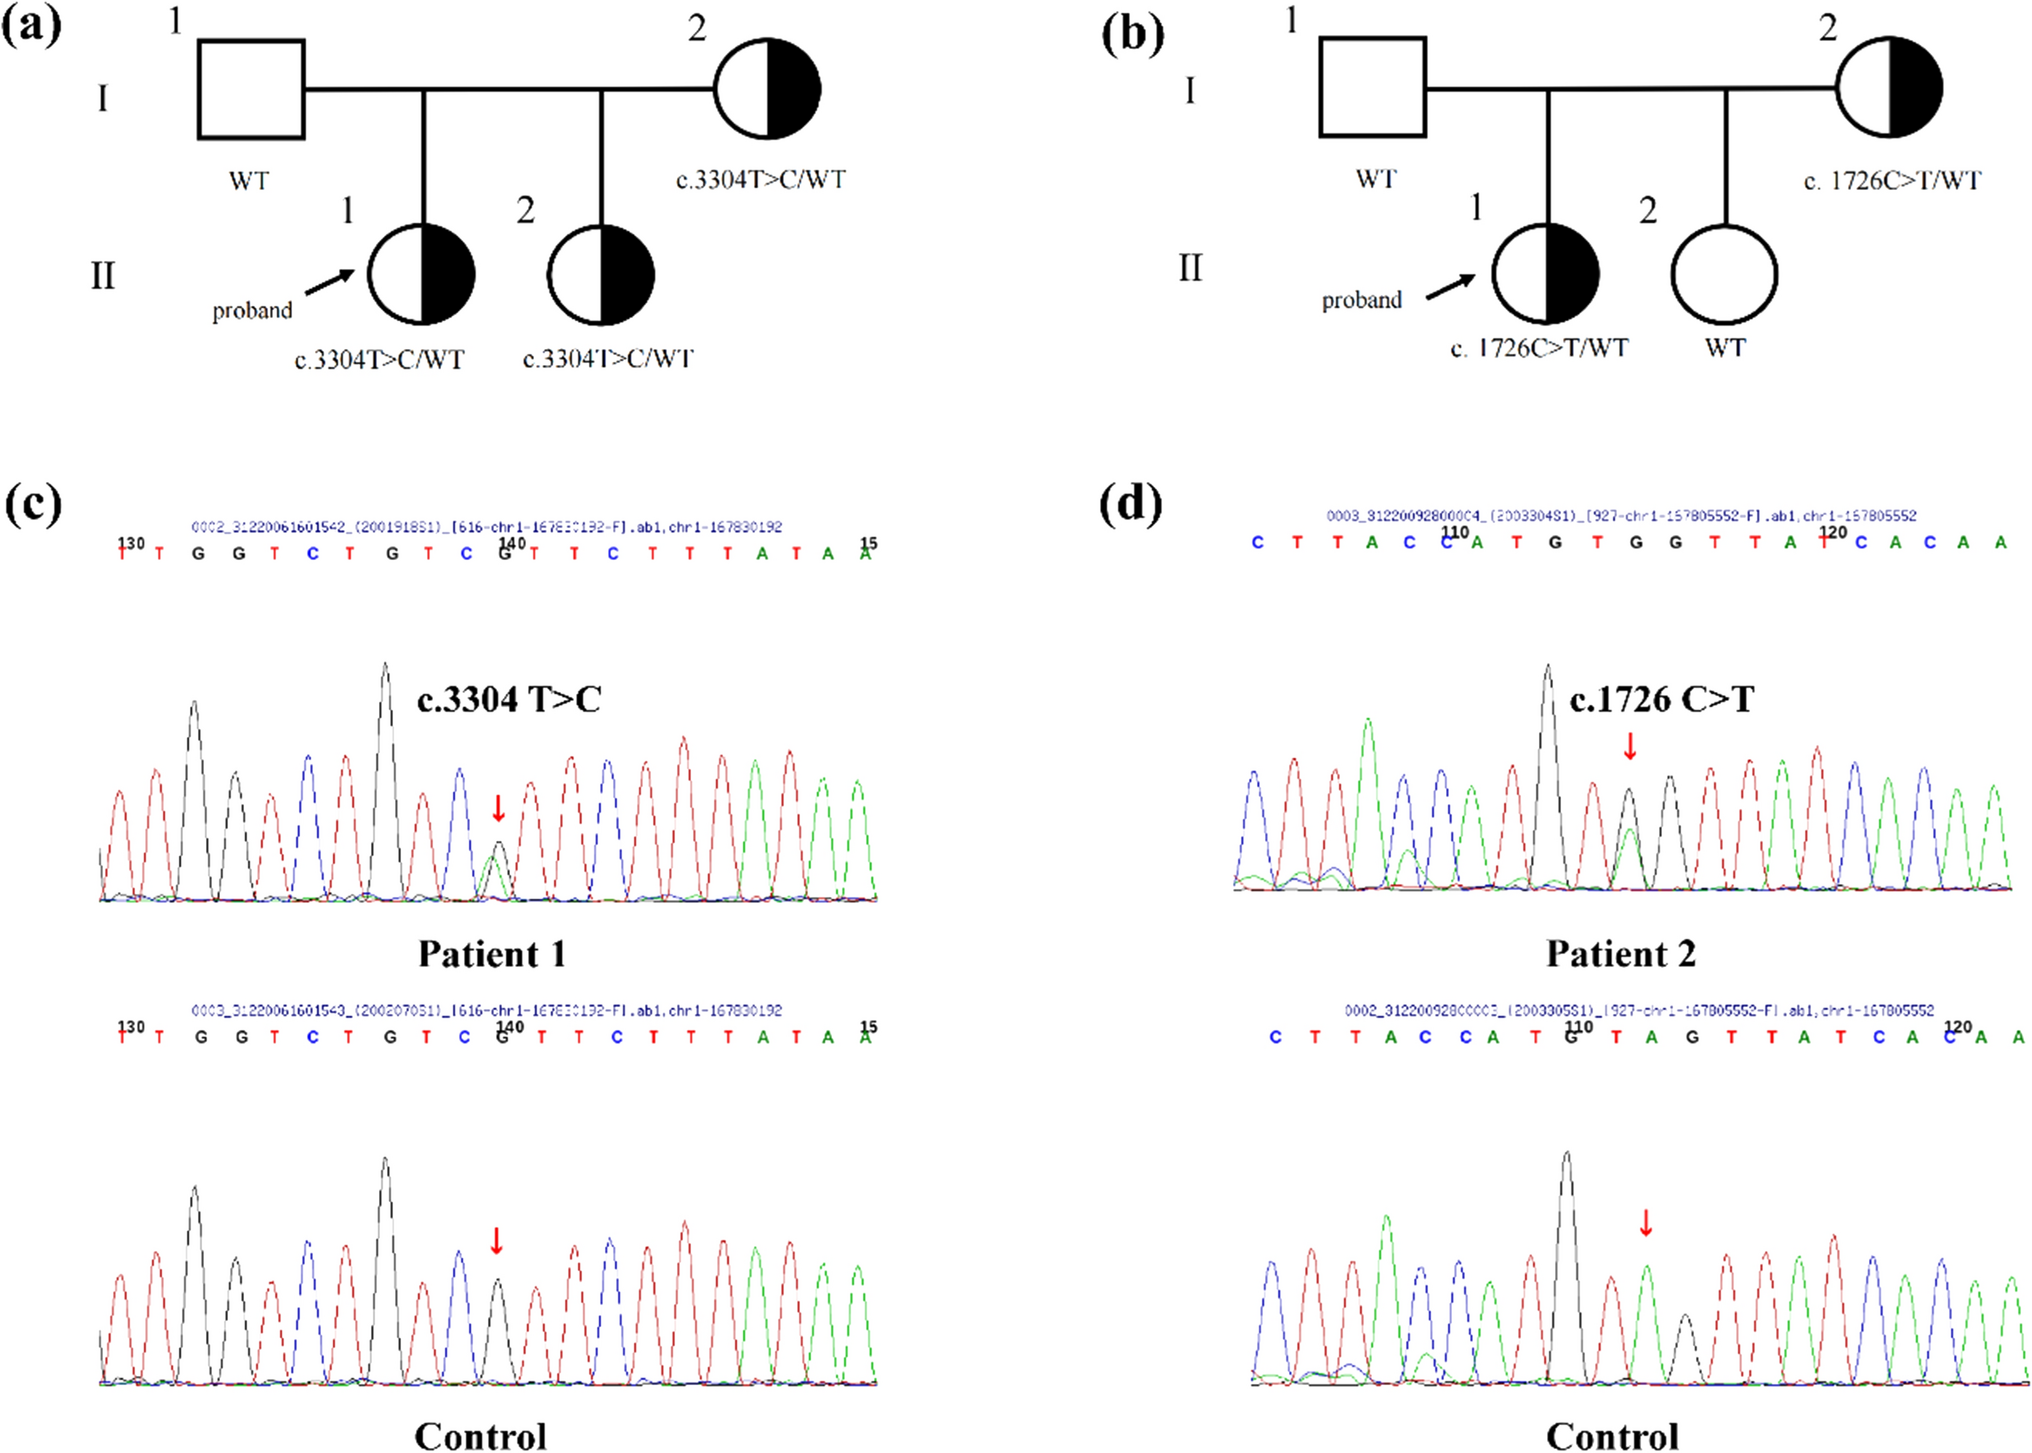 Two novel heterozygous ADCY10 variants identified in Chinese pediatric patients with absorptive hypercalciuria: case report and literature review